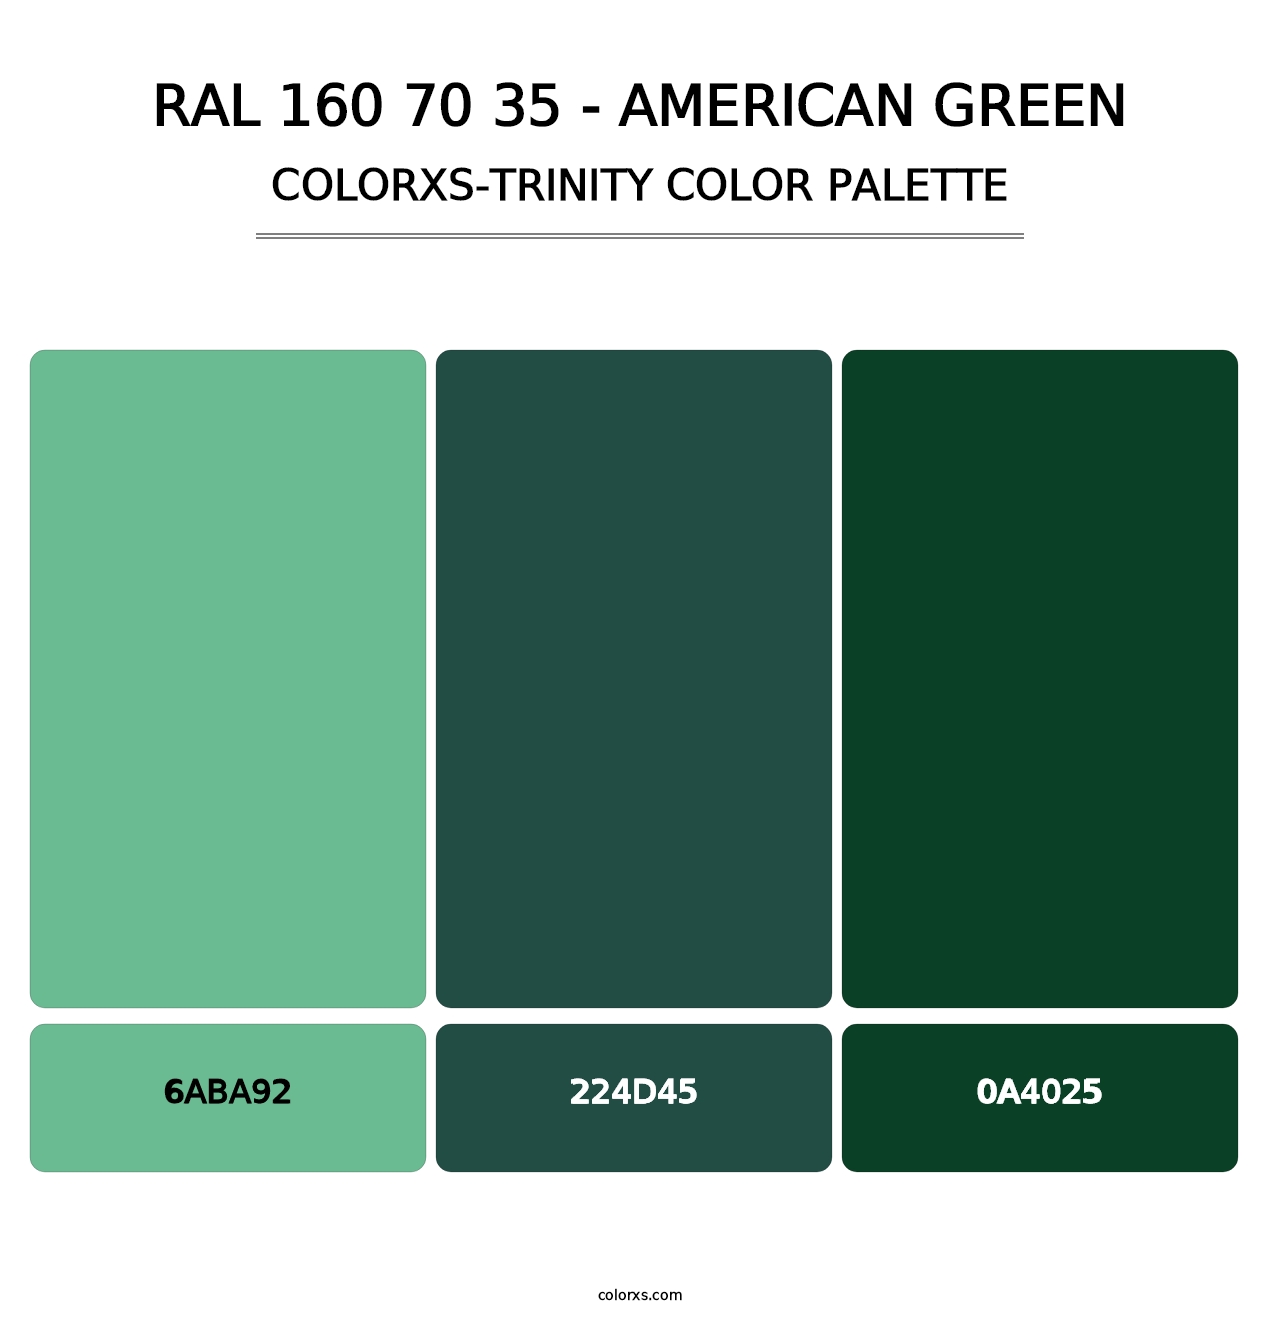 RAL 160 70 35 - American Green - Colorxs Trinity Palette